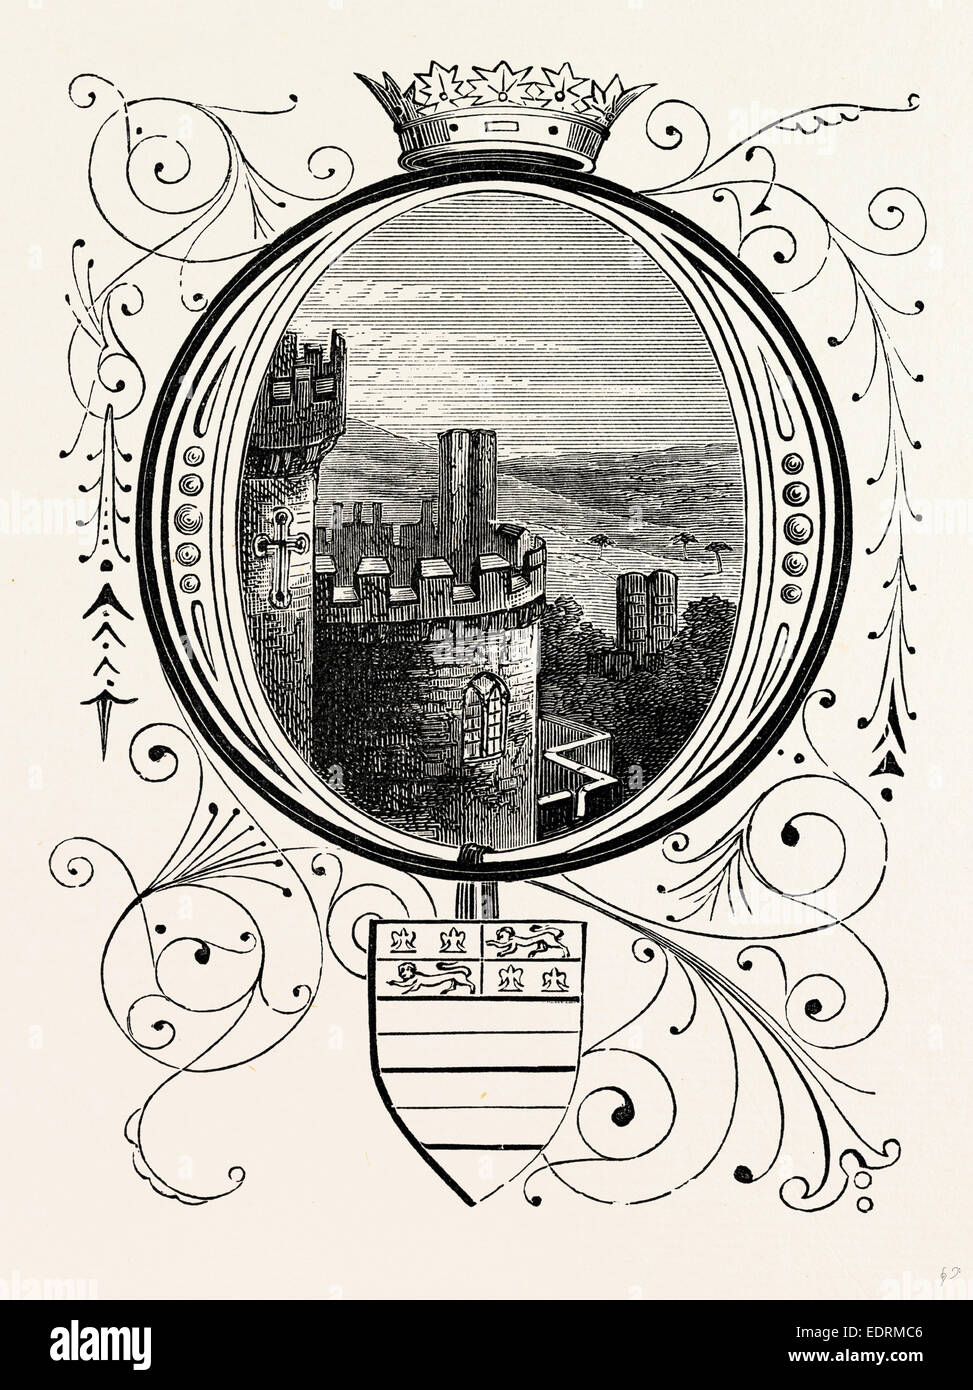 View from one of the Towers, Belvoir Castle, UK, England, engraving 1870s, Britain Stock Photo